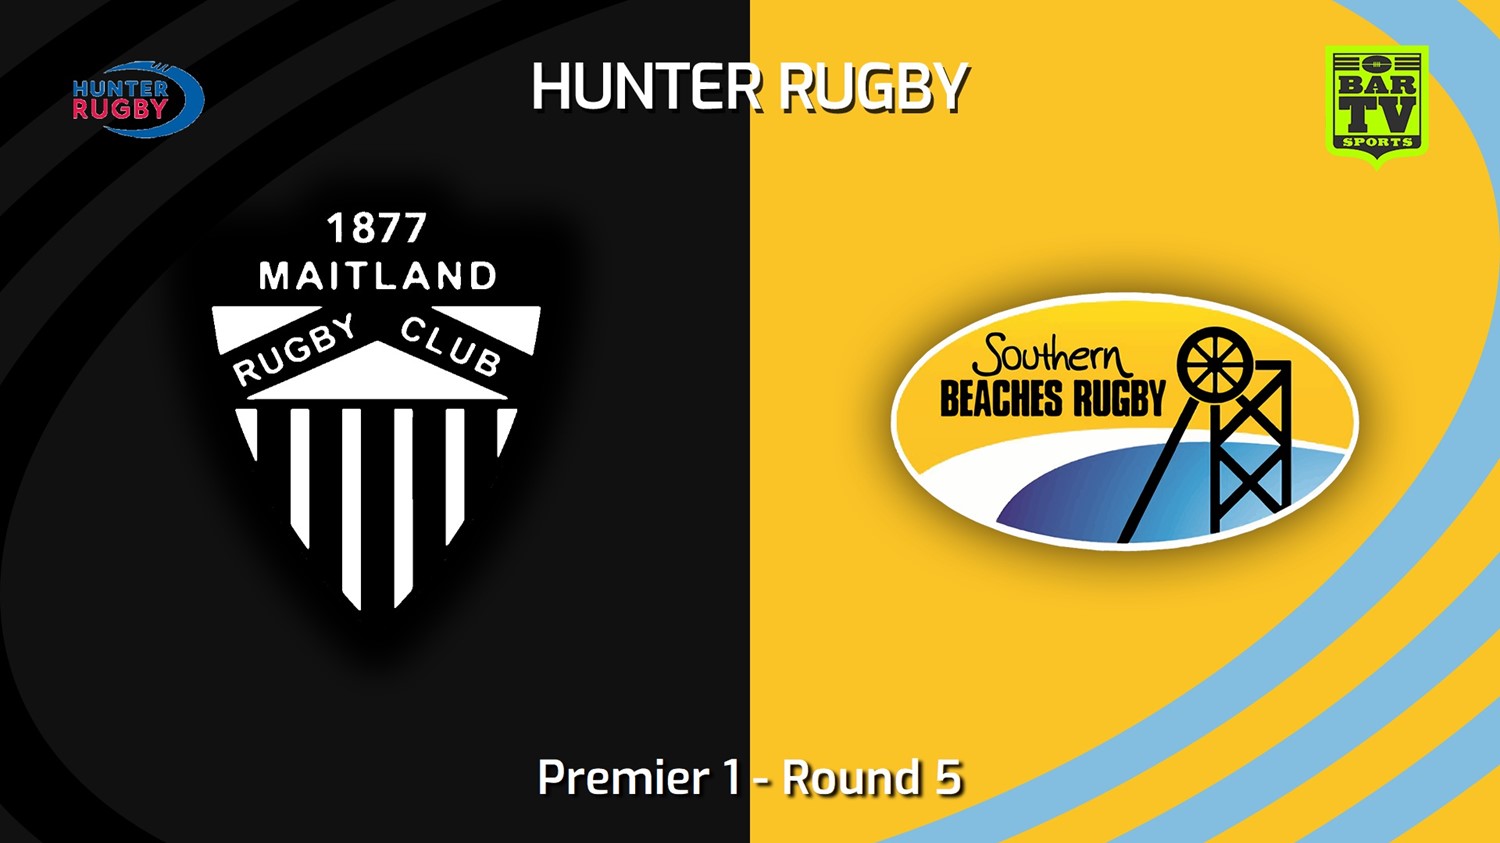 230513-Hunter Rugby Round 5 - Premier 1 - Maitland v Southern Beaches Slate Image